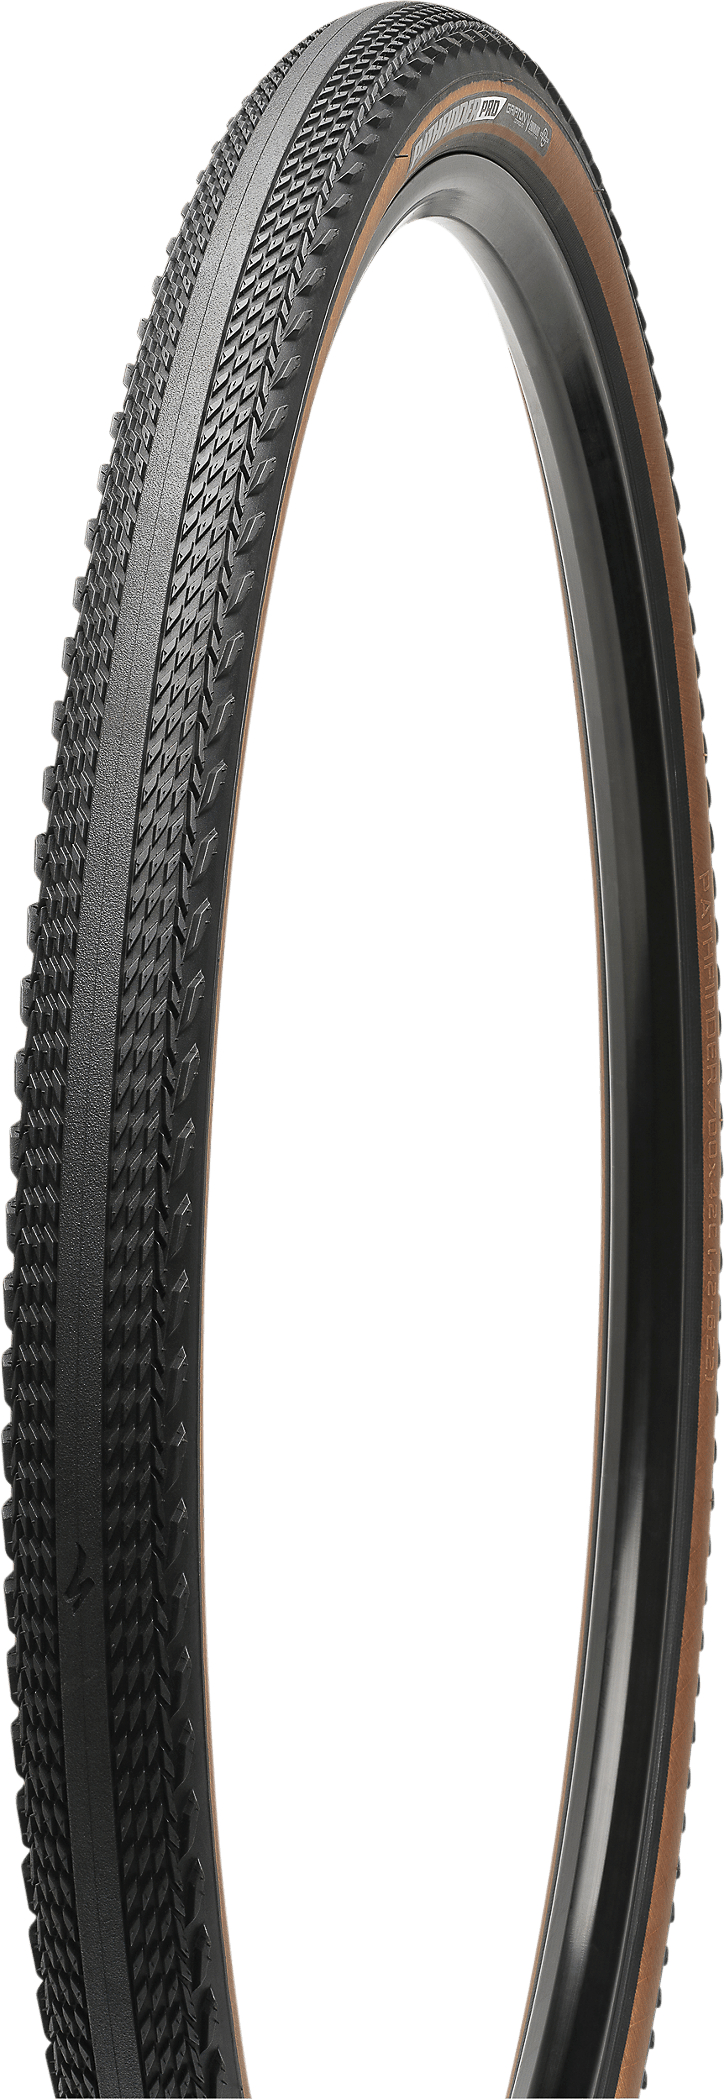 Specialized  Pathfinder Pro 2Bliss Ready Gravel Tyre with Tan Sidewalls 700 X 47 Transparent Sidewalls